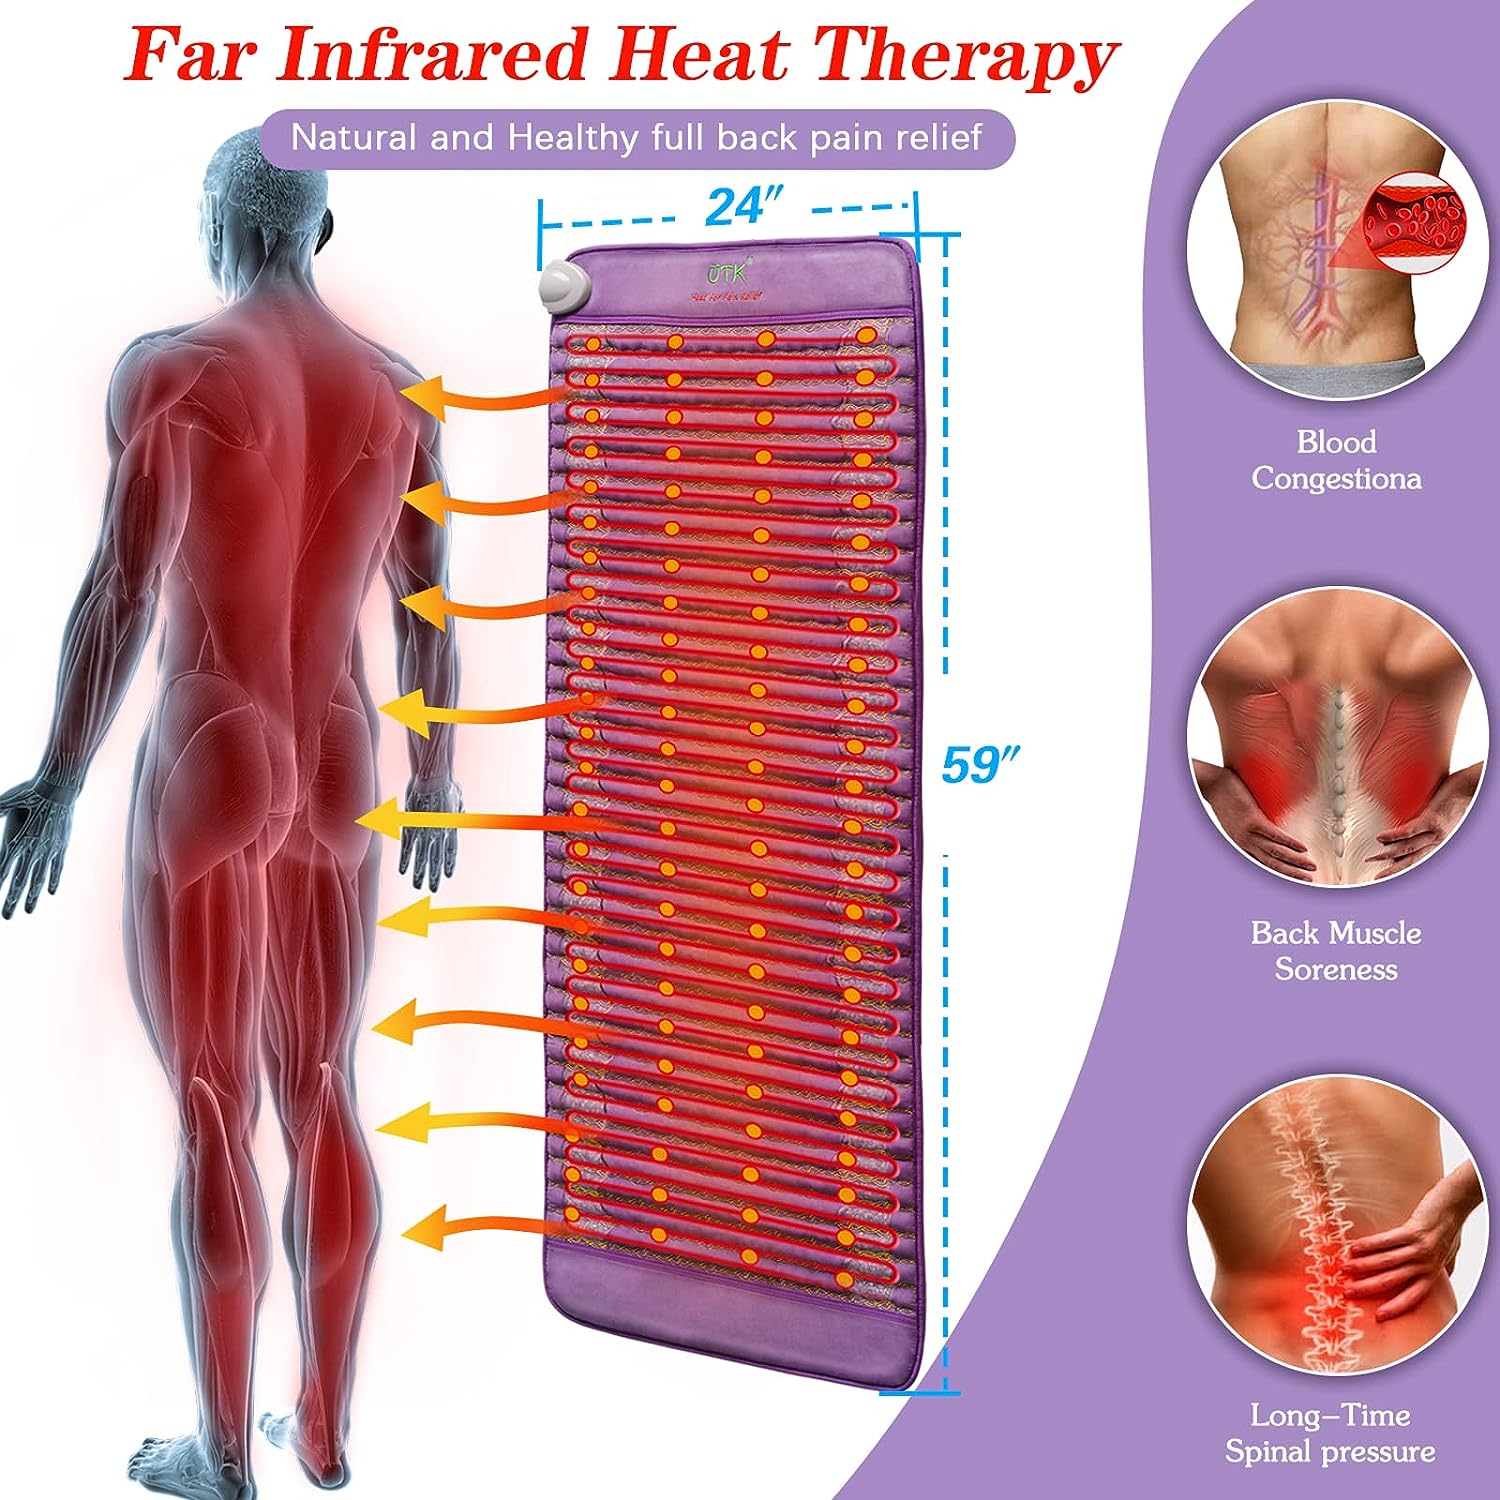 UTK Amethyst Infrared Heating Pad Far Infrared Heat Therapy for Back Pain Relief - Purely Relaxation